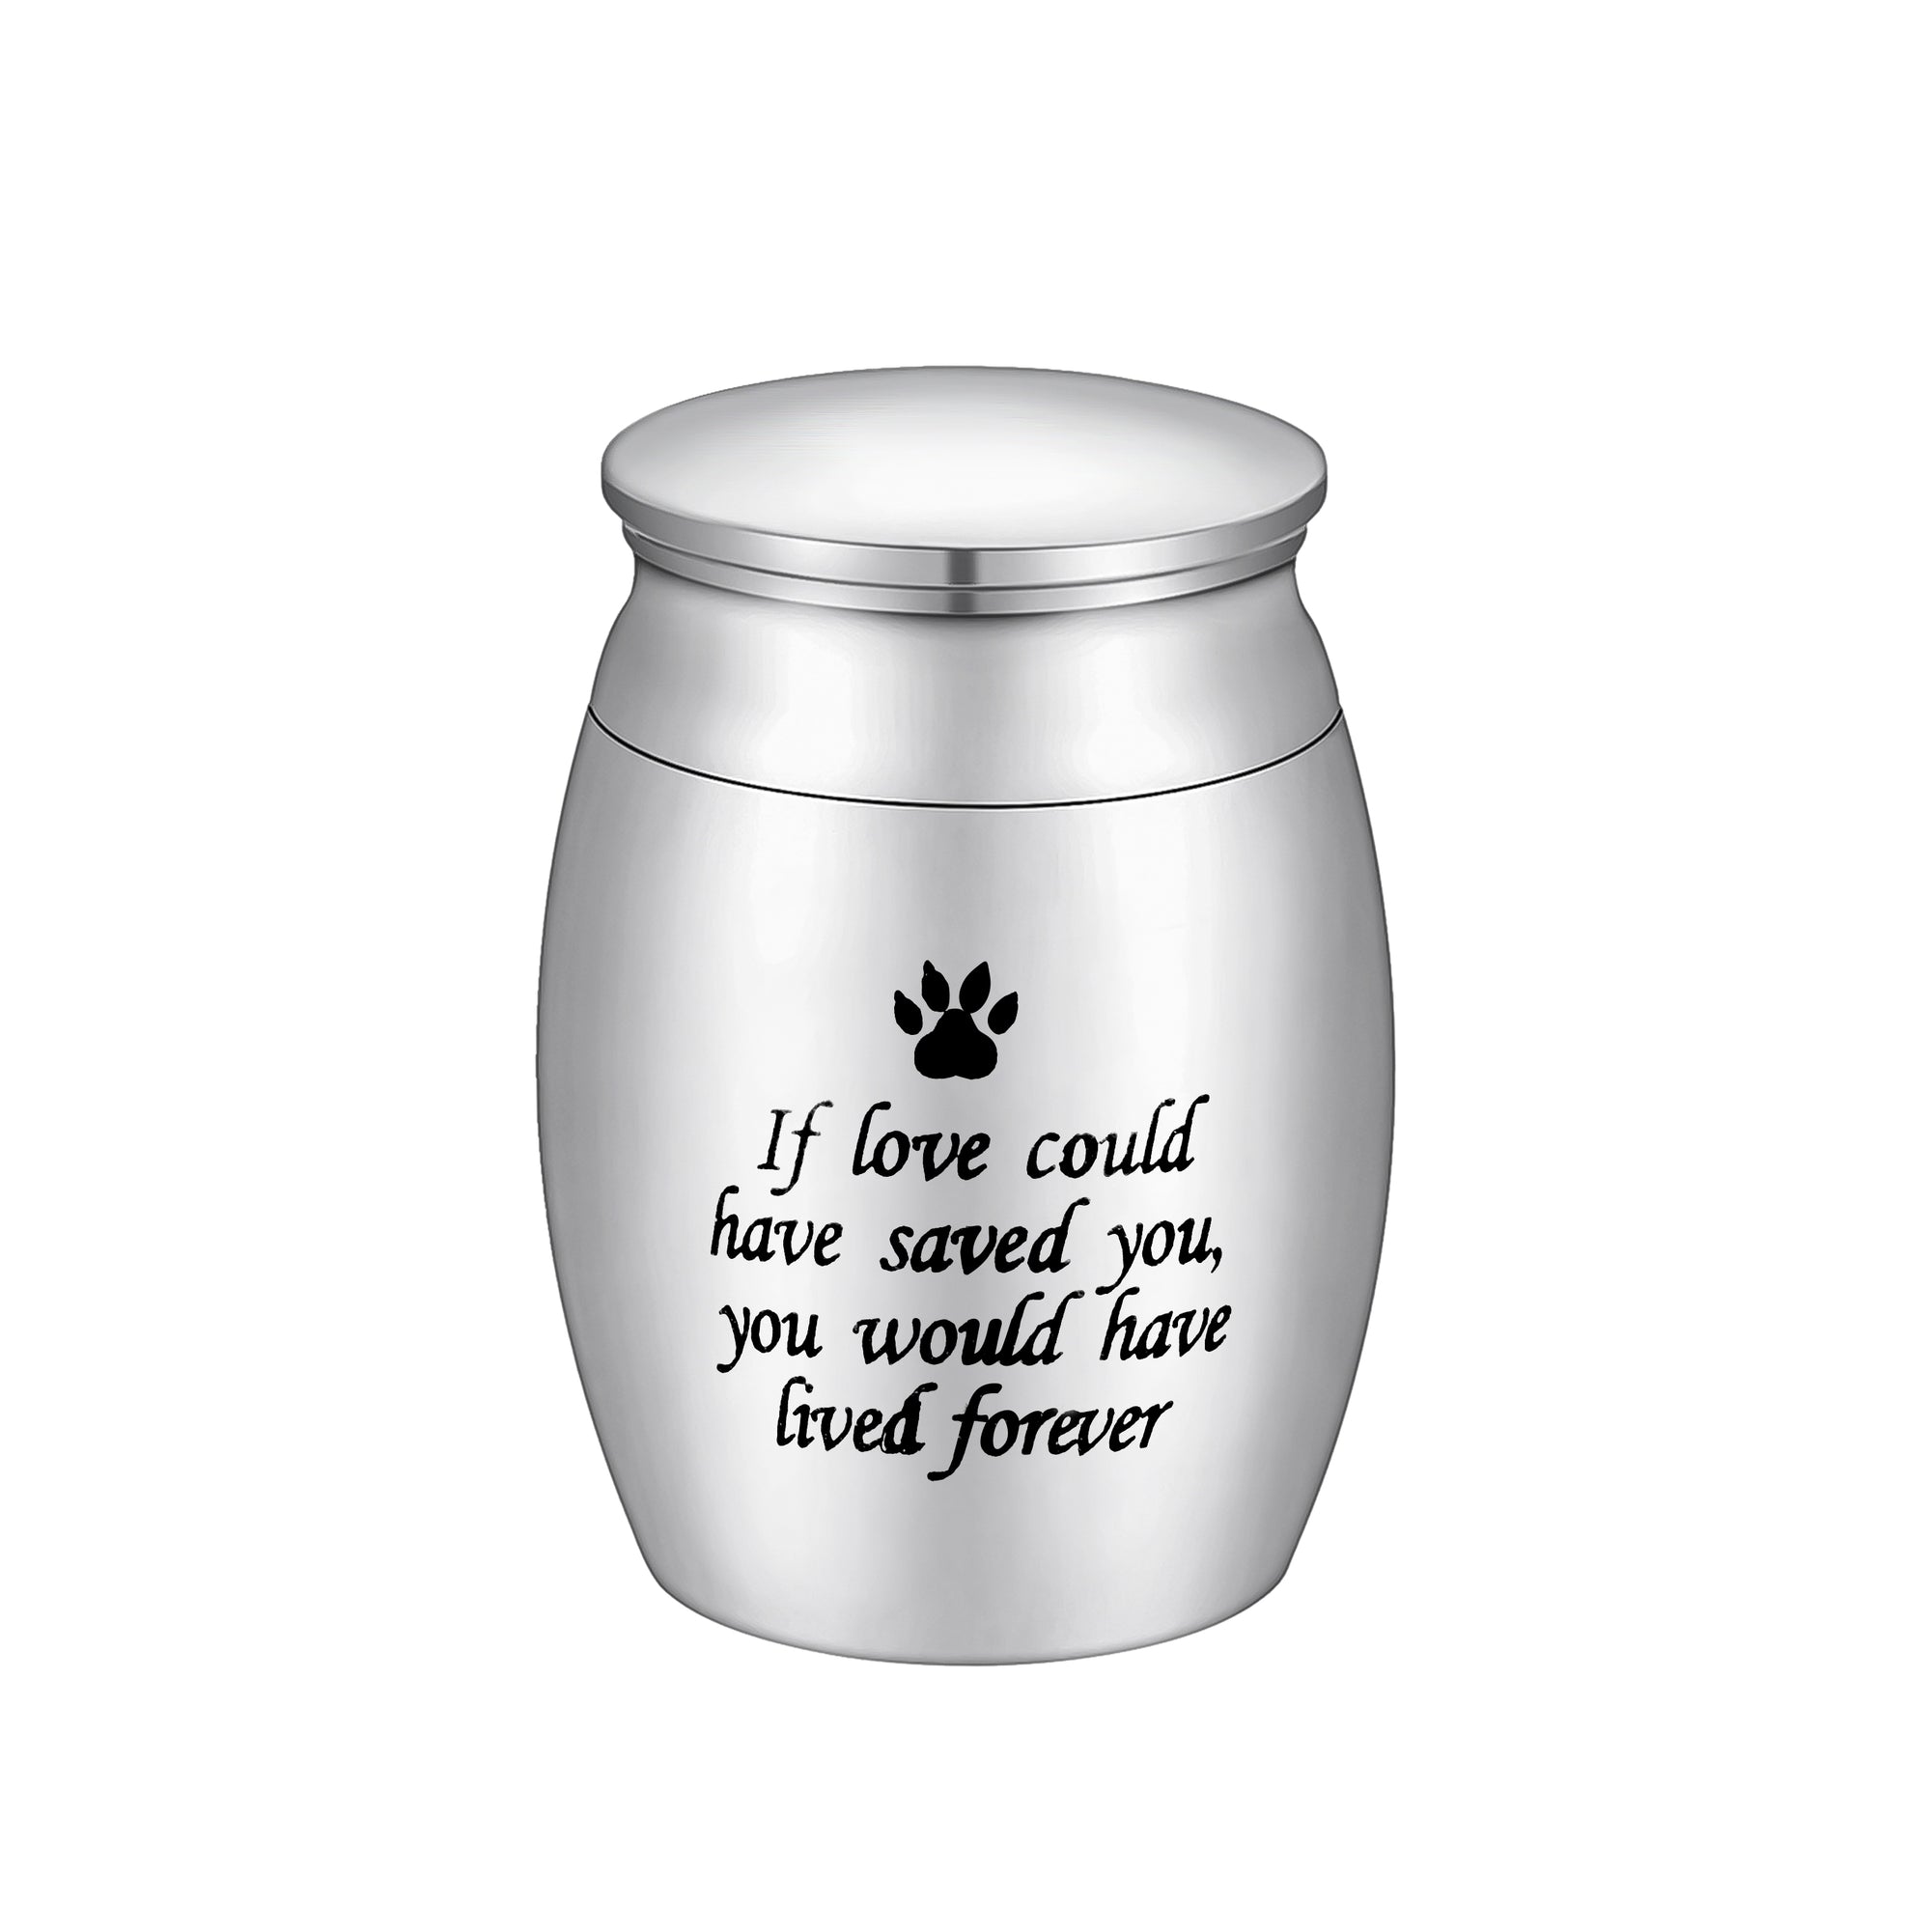 Cremation Urns for Pets